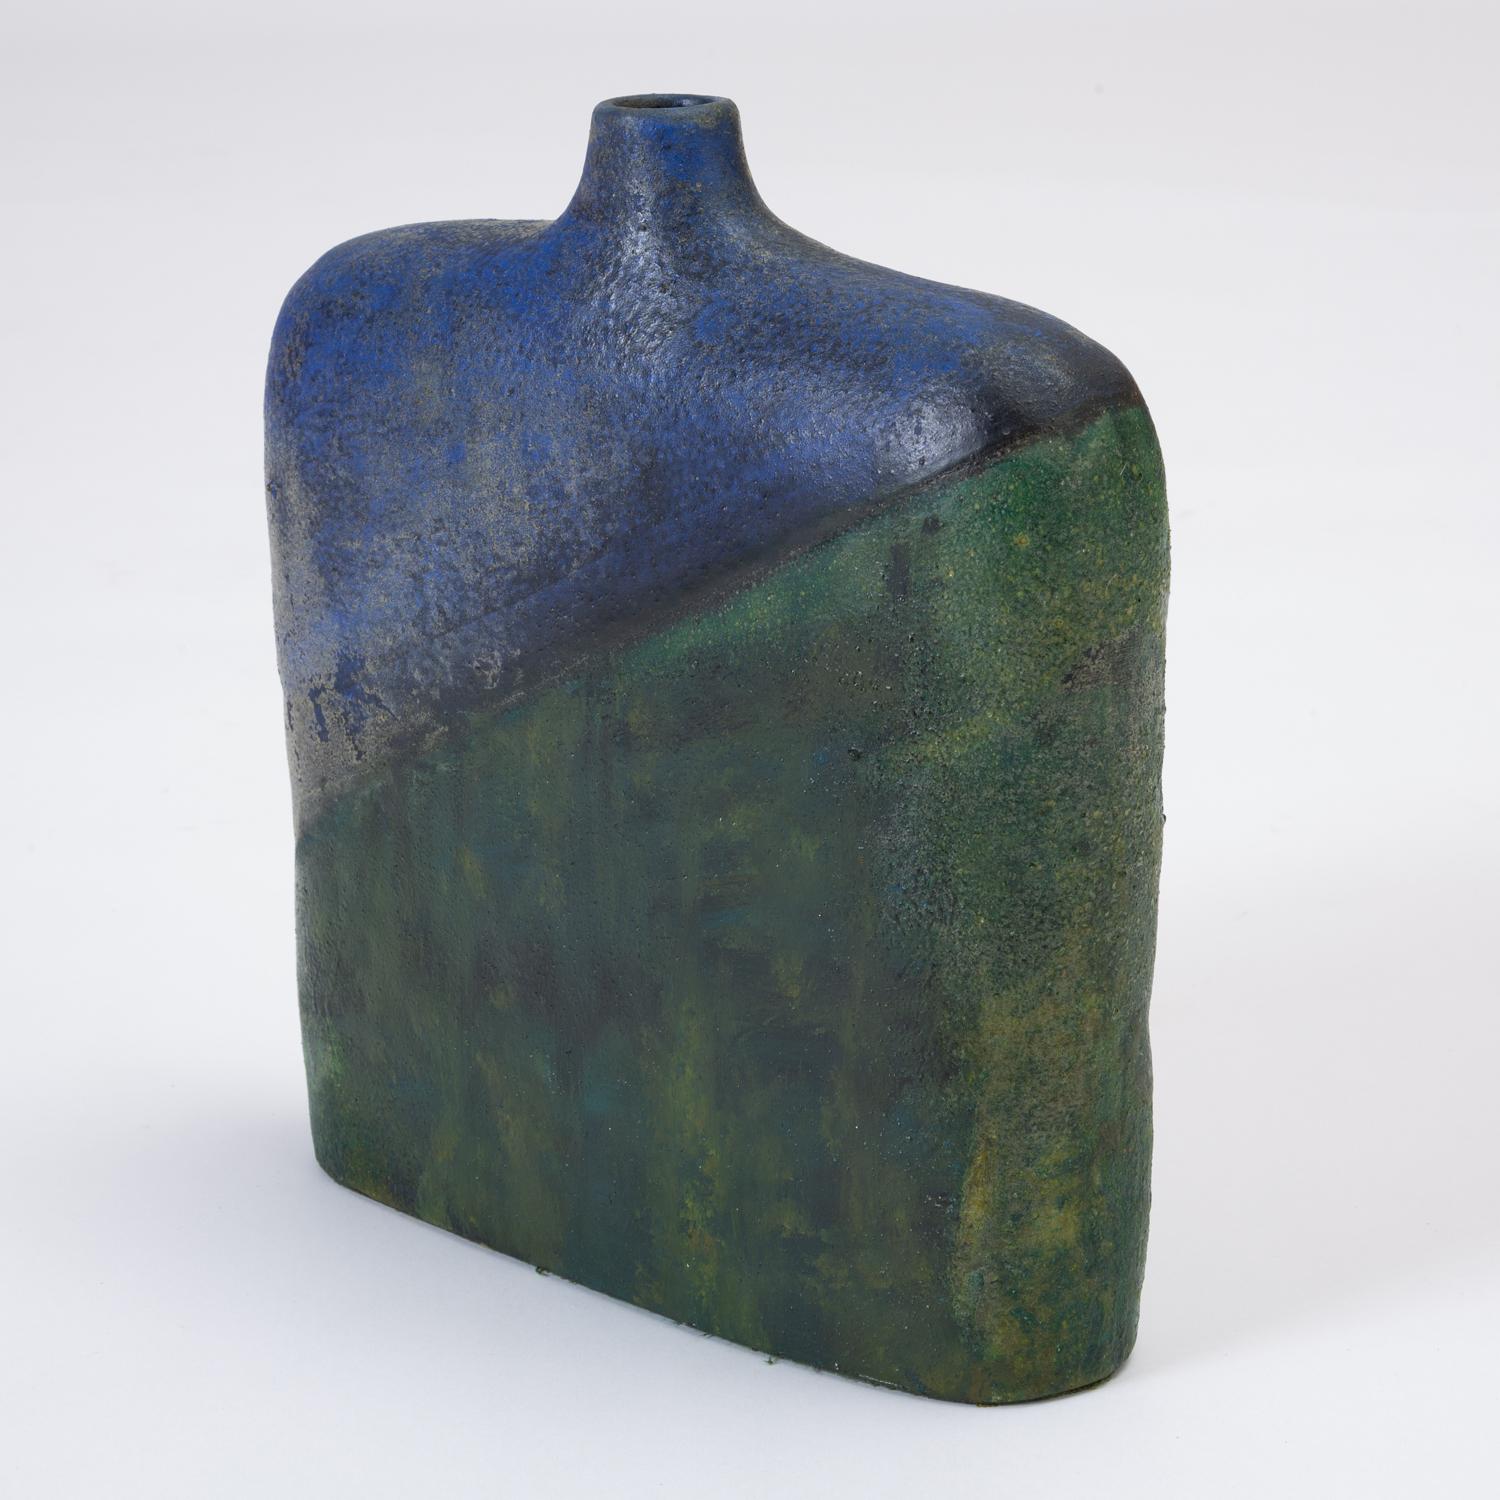 A wide-hipped vase with a narrow opening, this stylized shape was produced by Italian sculptor and ceramicist Marcello Fantoni for Raymor. The vase is hand painted, and the glaze has notes of teal, midnight, ultramarine and jade. Signed on